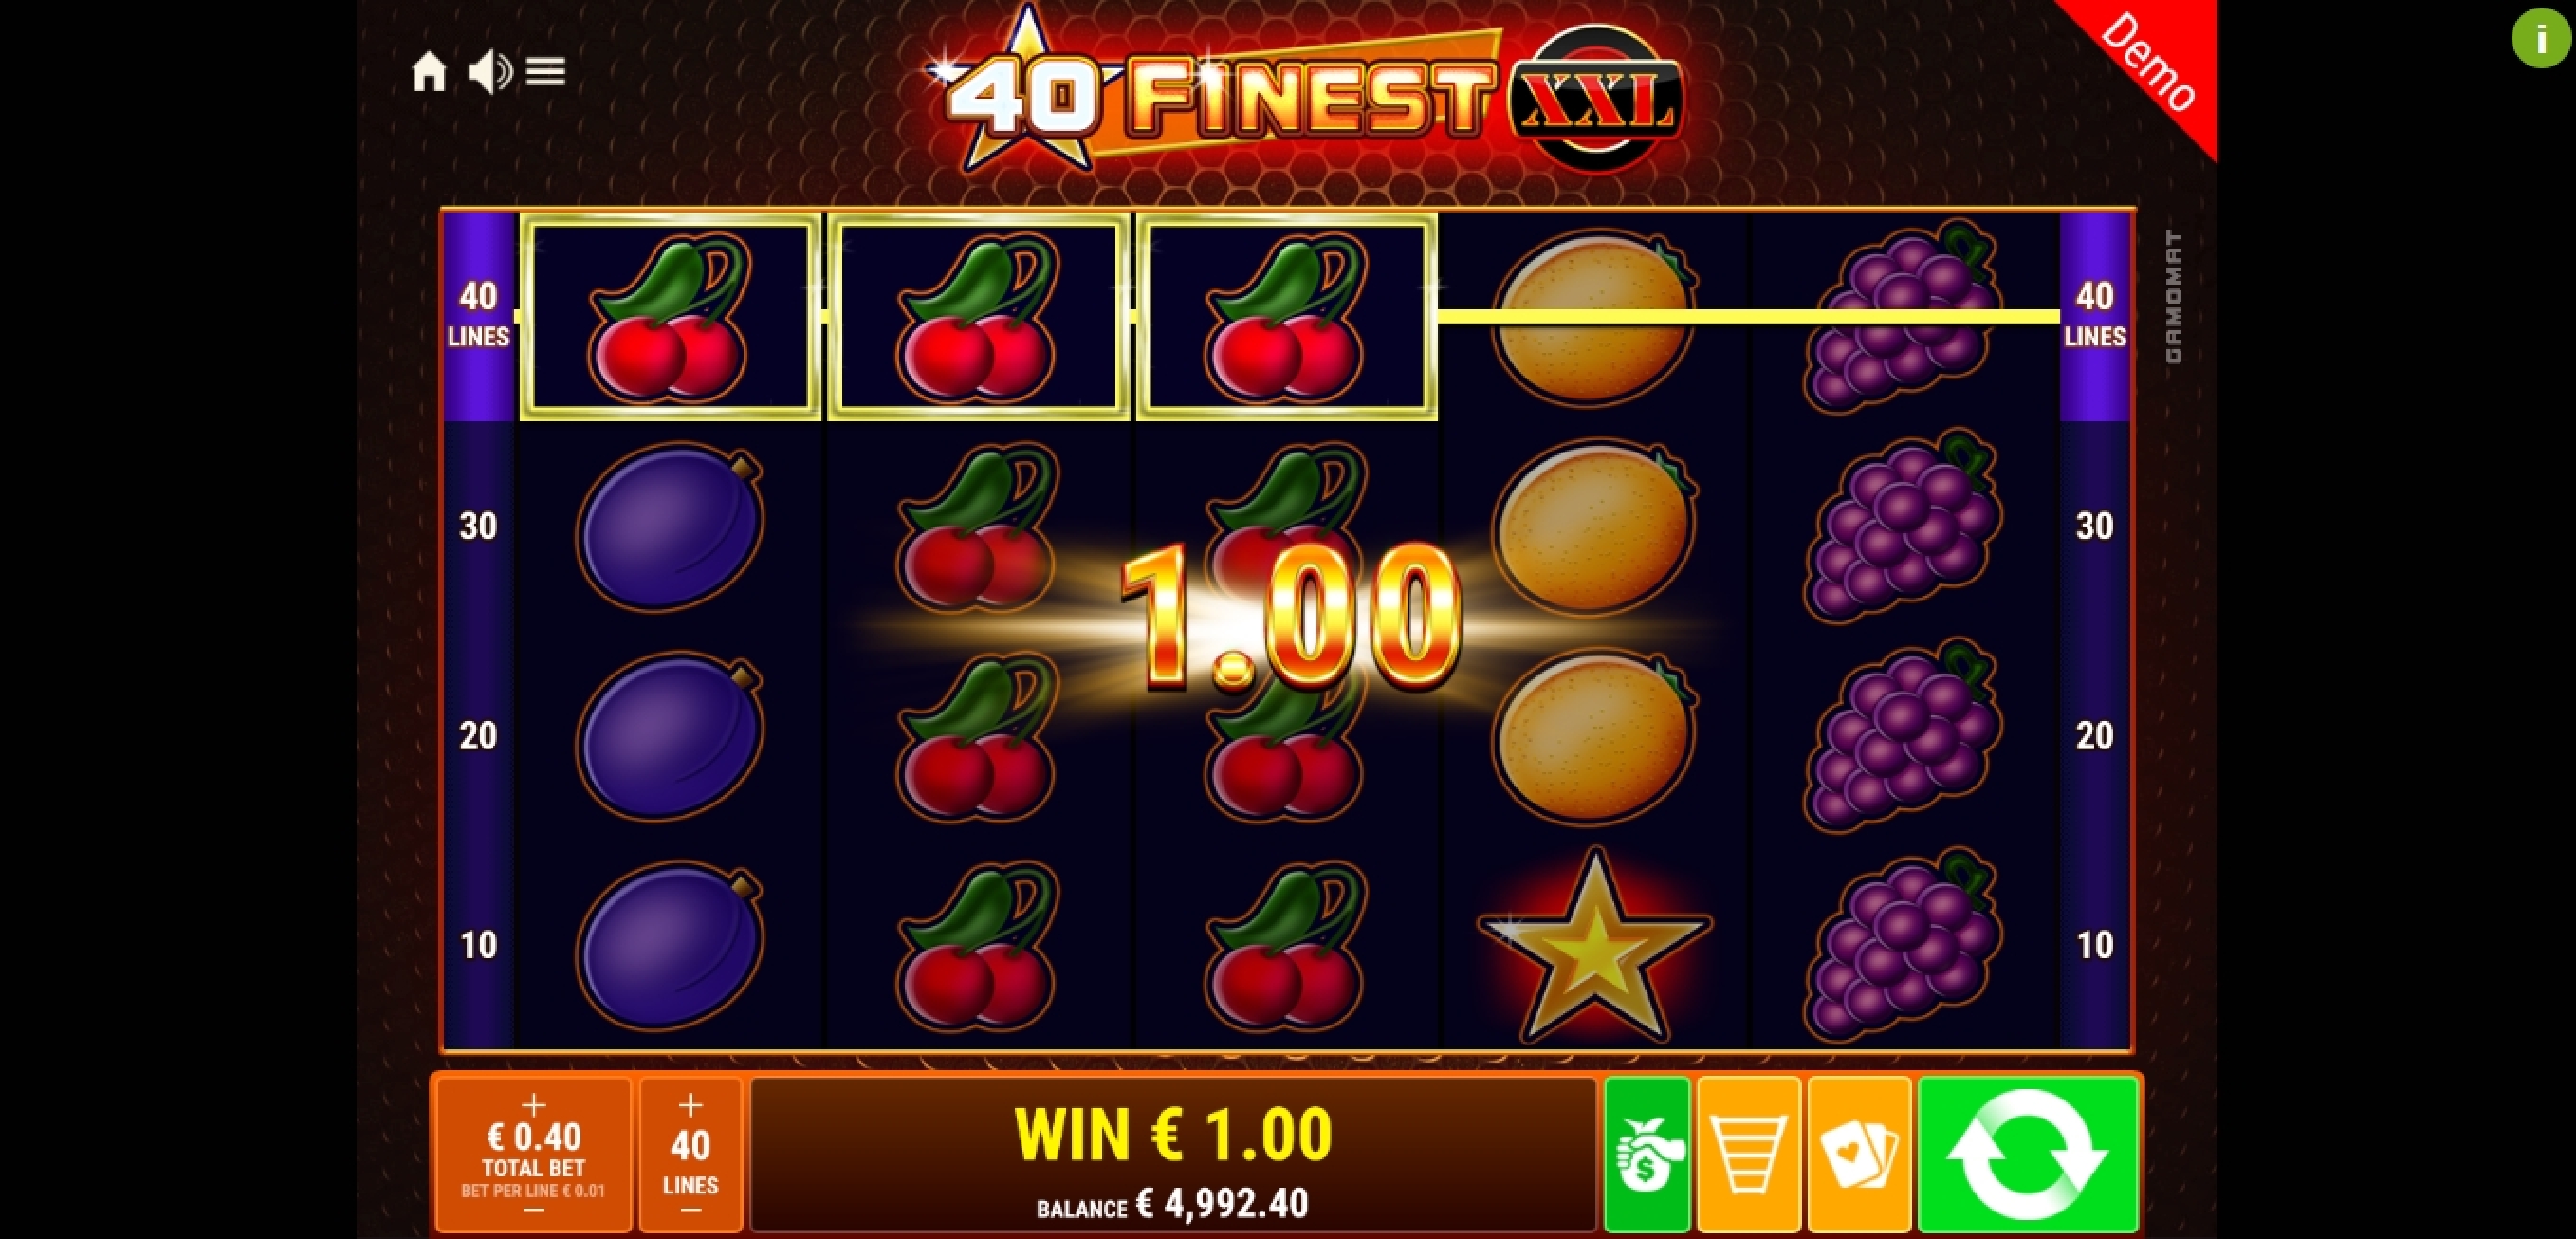 Win Money in 40 Finest XXL Free Slot Game by Gamomat